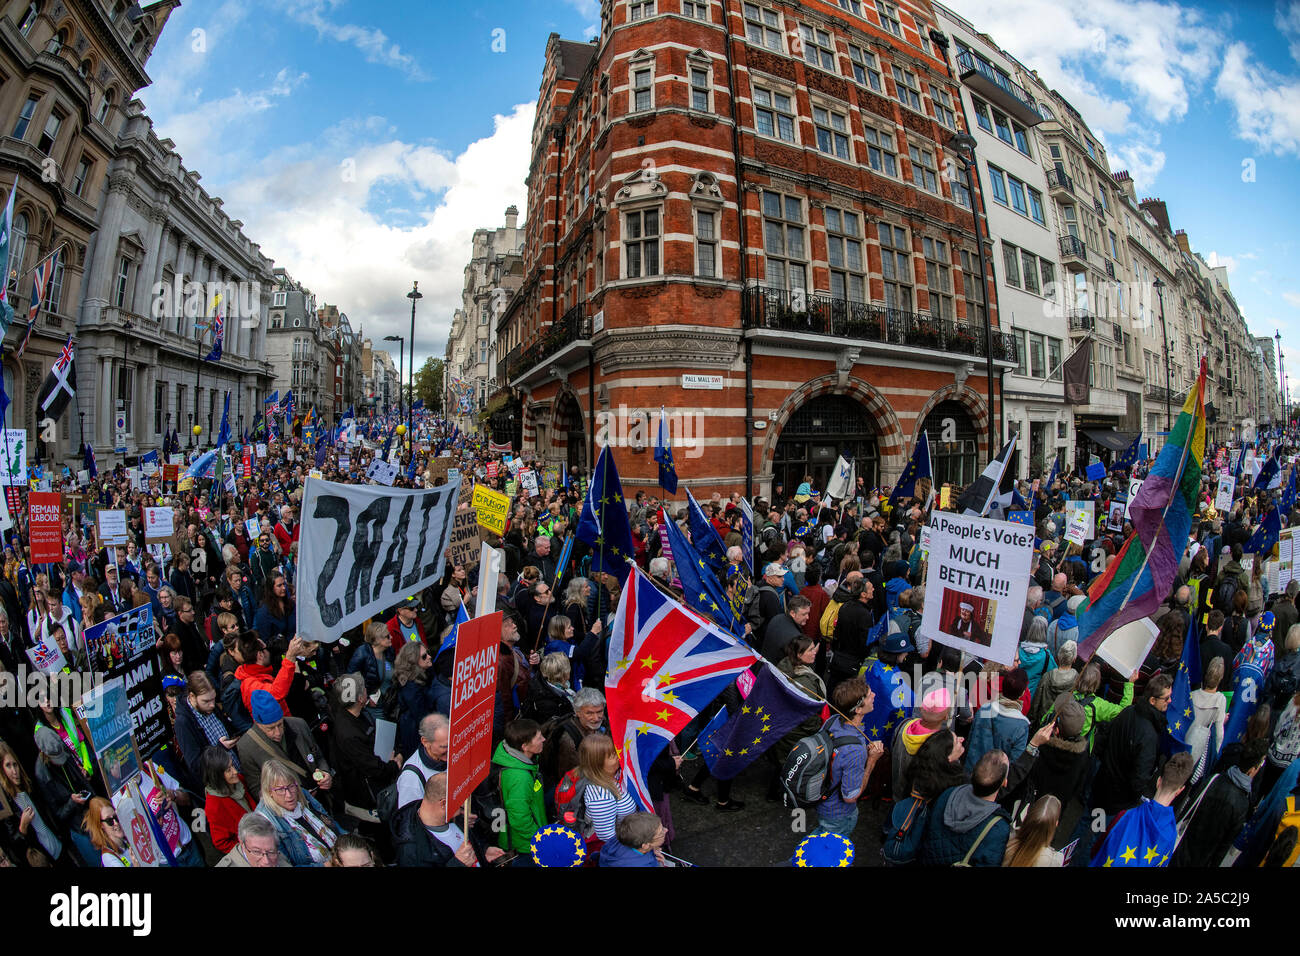 Protesters demanding another Brexit referendum march towards Parliament Square in Central London today. People's Vote March. Stock Photo